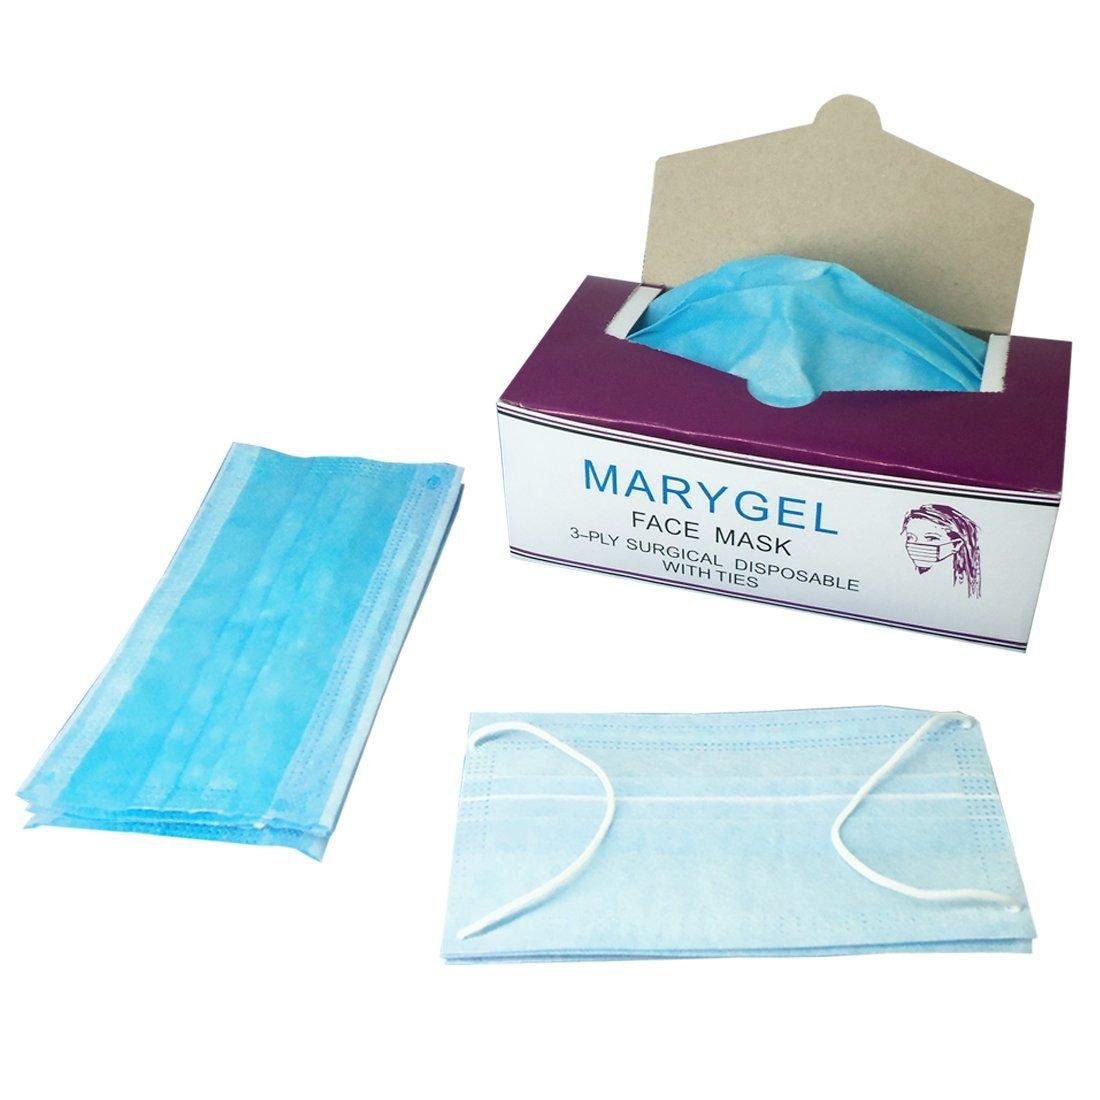 3-PLY Non-woven Fabric Disposable Surgical Masks 50 Pieces (Blue) 2